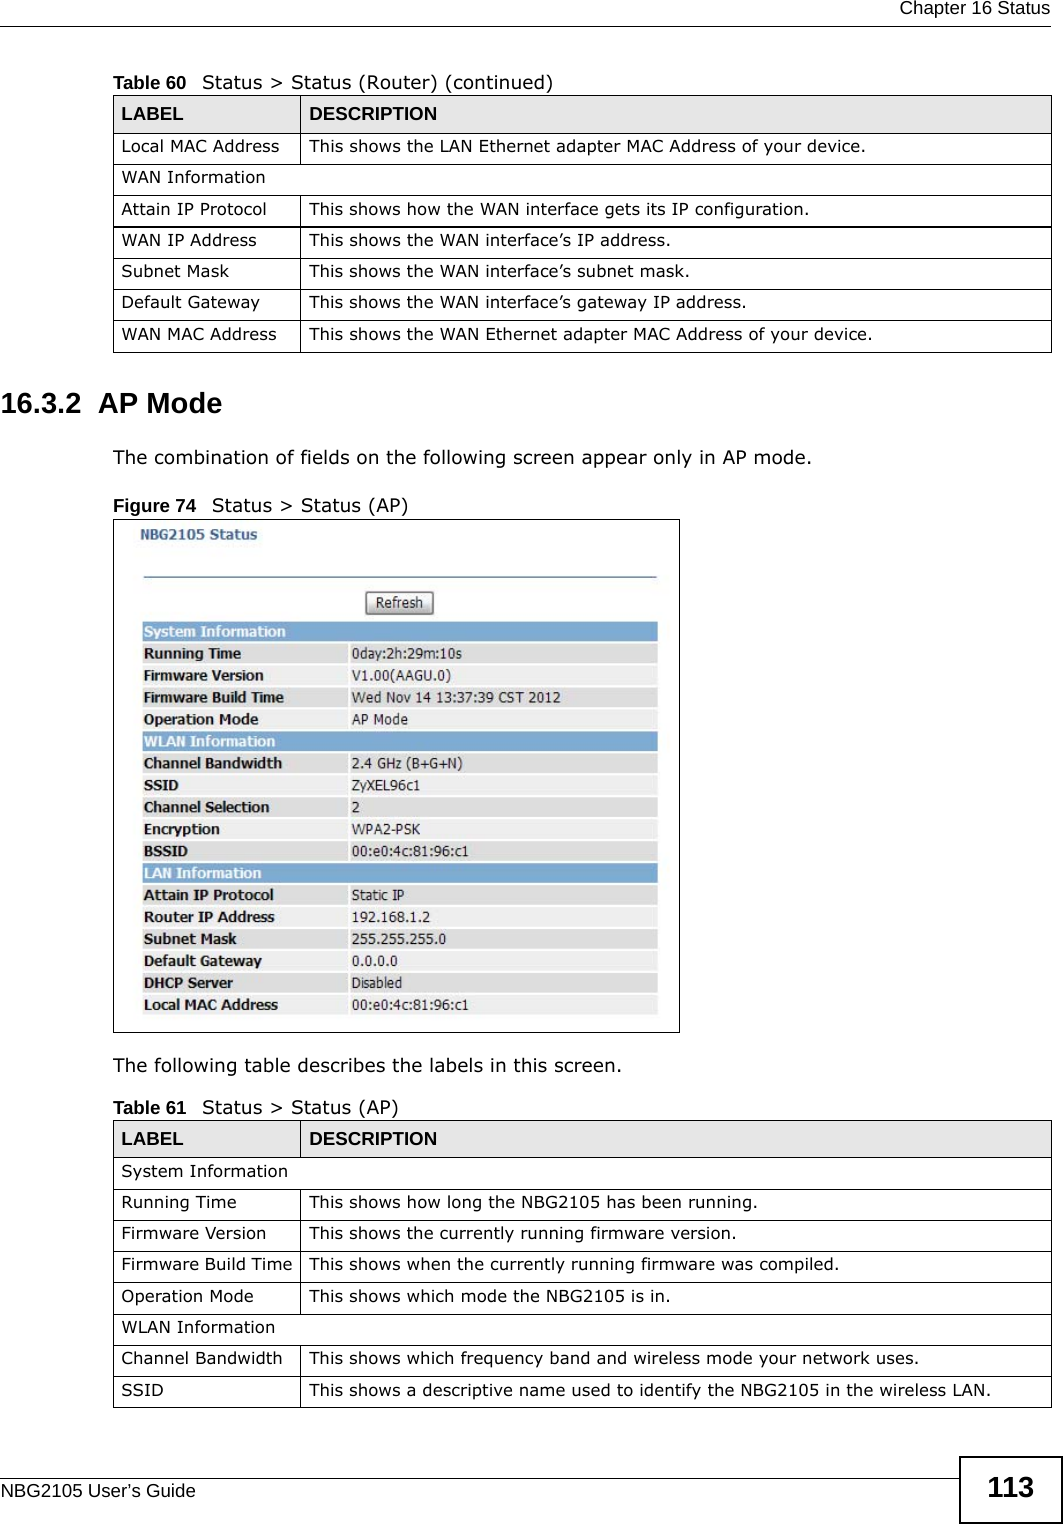  Chapter 16 StatusNBG2105 User’s Guide 11316.3.2  AP ModeThe combination of fields on the following screen appear only in AP mode.Figure 74   Status &gt; Status (AP) The following table describes the labels in this screen.Local MAC Address This shows the LAN Ethernet adapter MAC Address of your device.WAN InformationAttain IP Protocol This shows how the WAN interface gets its IP configuration.WAN IP Address This shows the WAN interface’s IP address.Subnet Mask This shows the WAN interface’s subnet mask.Default Gateway This shows the WAN interface’s gateway IP address.WAN MAC Address This shows the WAN Ethernet adapter MAC Address of your device.Table 60   Status &gt; Status (Router) (continued)LABEL DESCRIPTIONTable 61   Status &gt; Status (AP)LABEL DESCRIPTIONSystem InformationRunning Time This shows how long the NBG2105 has been running.Firmware Version This shows the currently running firmware version.Firmware Build Time This shows when the currently running firmware was compiled.Operation Mode This shows which mode the NBG2105 is in.WLAN InformationChannel Bandwidth This shows which frequency band and wireless mode your network uses.SSID This shows a descriptive name used to identify the NBG2105 in the wireless LAN. 